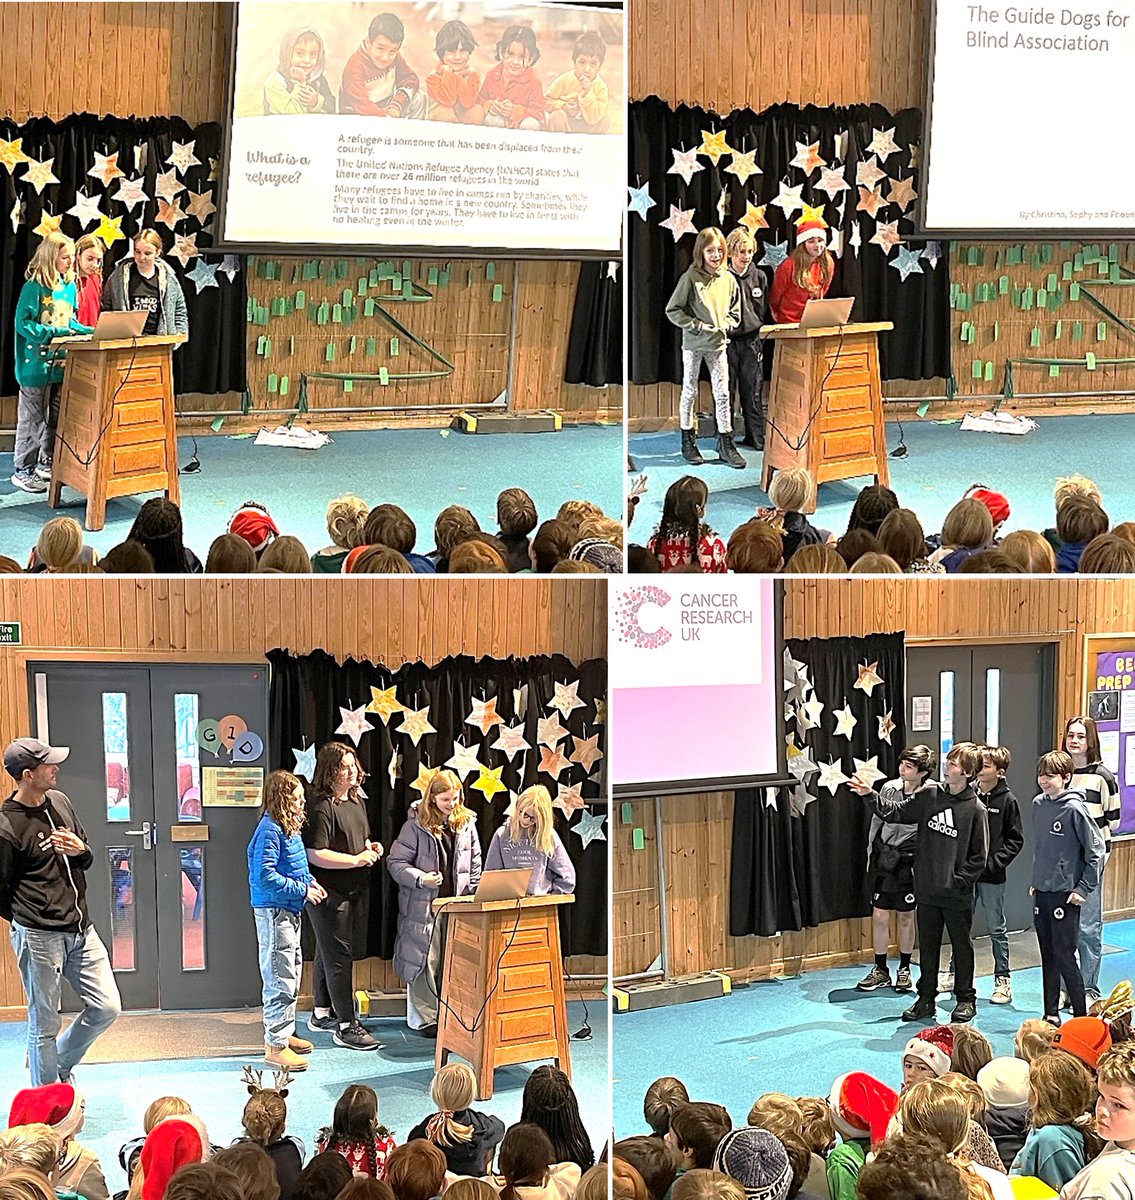 We were all hugely impressed with the children who took it in turns to stand in front of the school and speak about their preferred HOPiT charities (Helping Other People in Trouble). 

#charityfundraisers #schoolfundraiser #wearethefuture #petersfieldpulse #bedalesprep